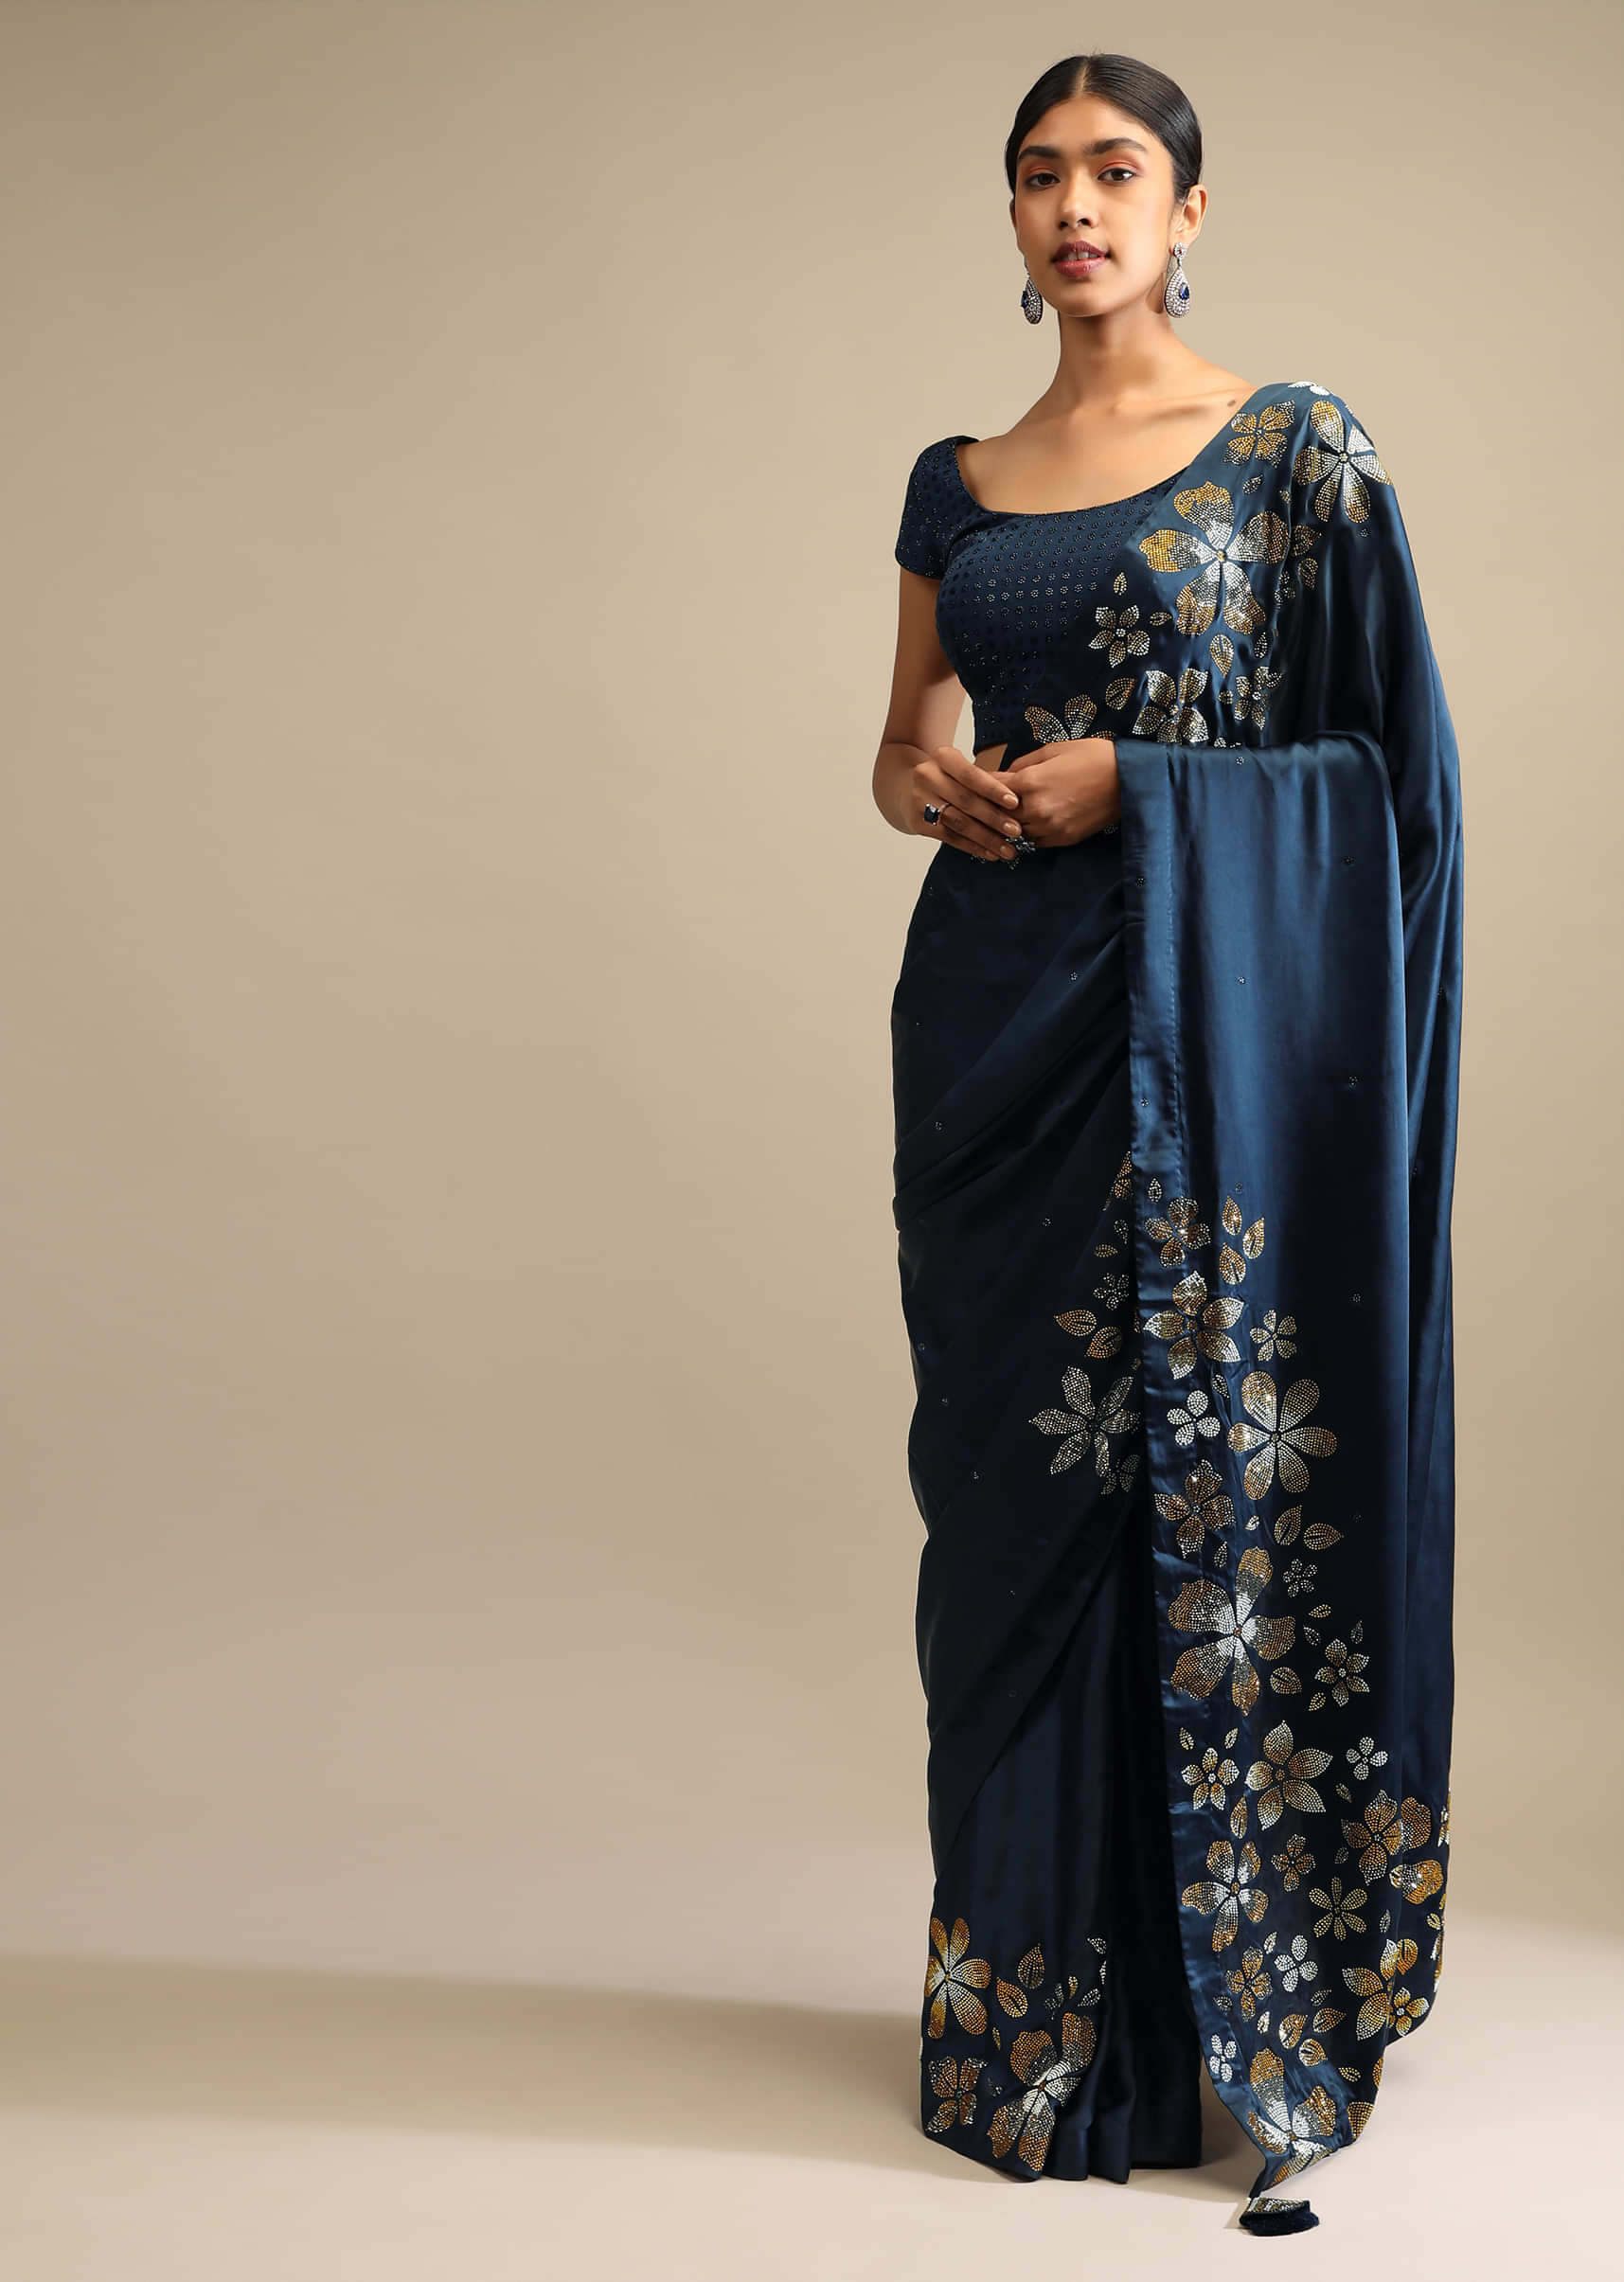 Midnight Blue Saree In Satin With Three Toned Kundan Embellished Floral Motifs Along The Border  